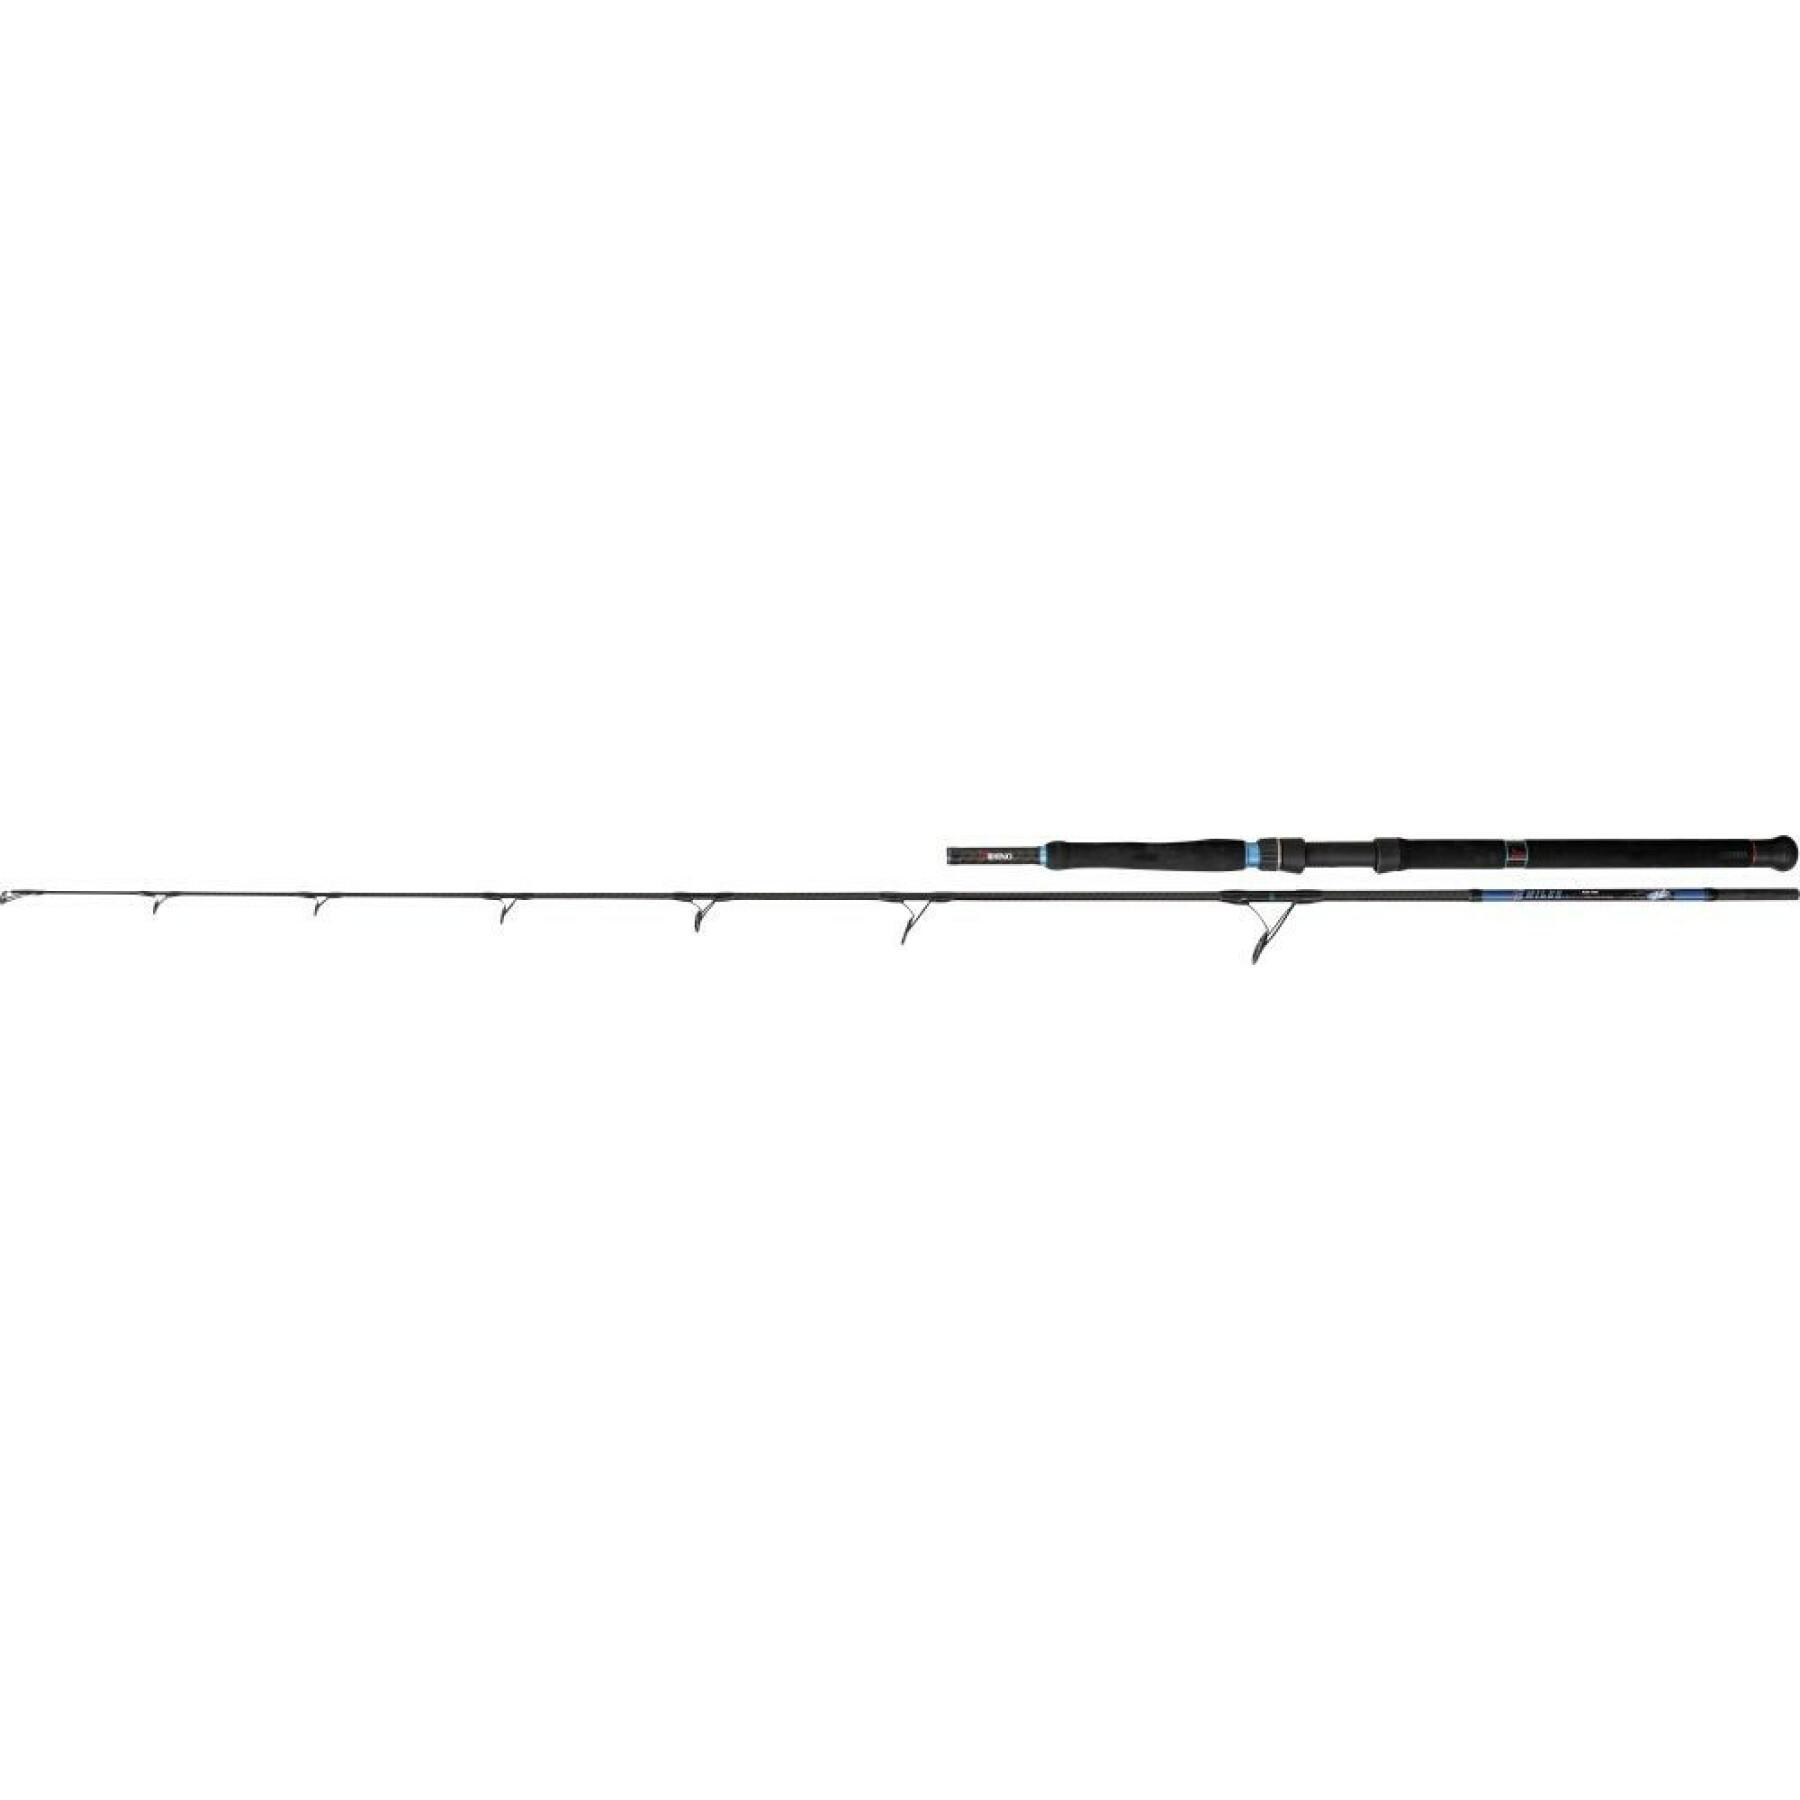 Canna Rhino 8 Miles Out Blue Fish 200-250g